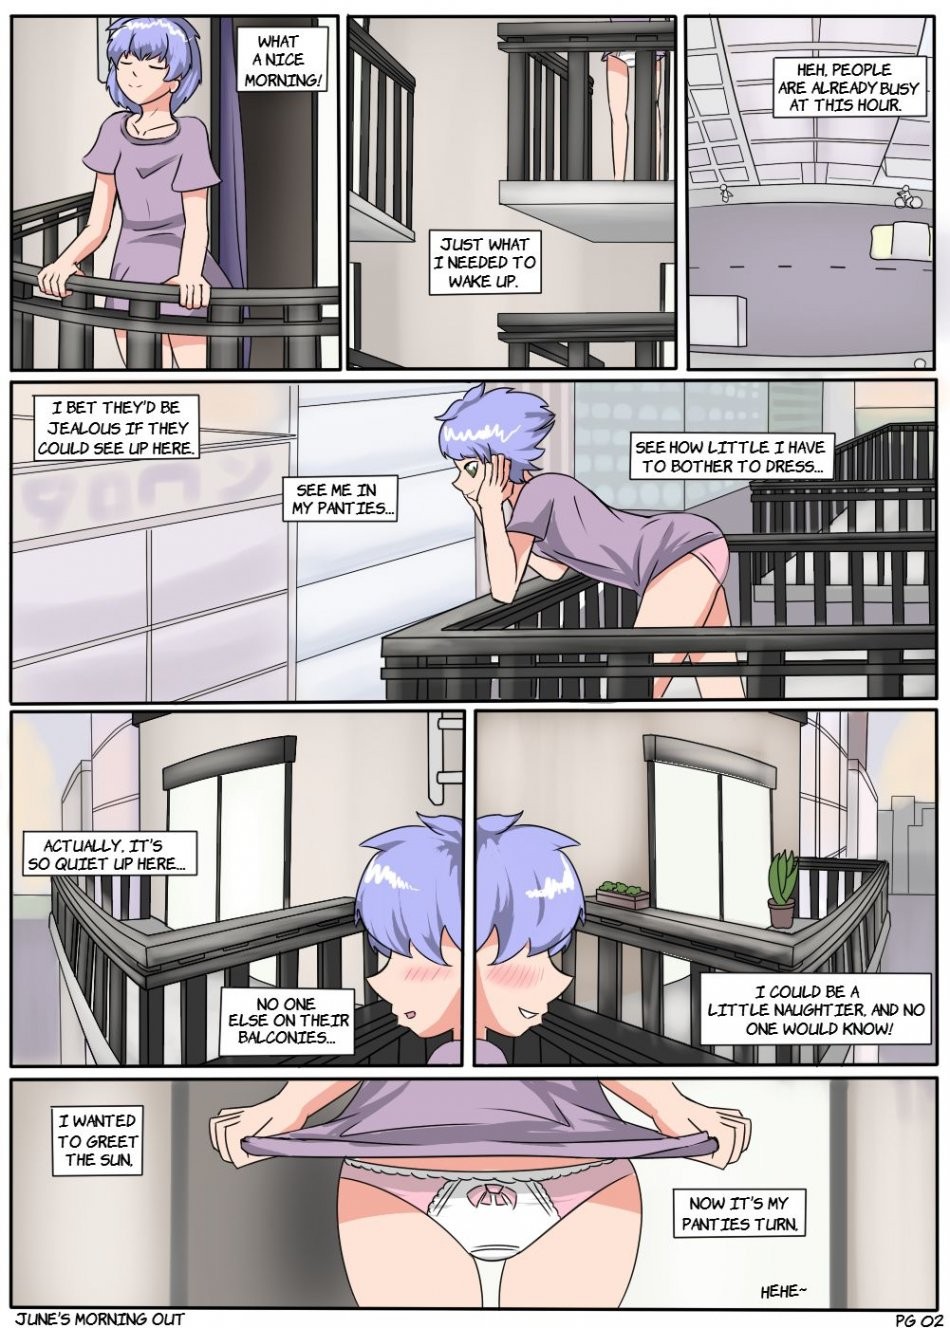 June's Morning Out porn comic picture 2